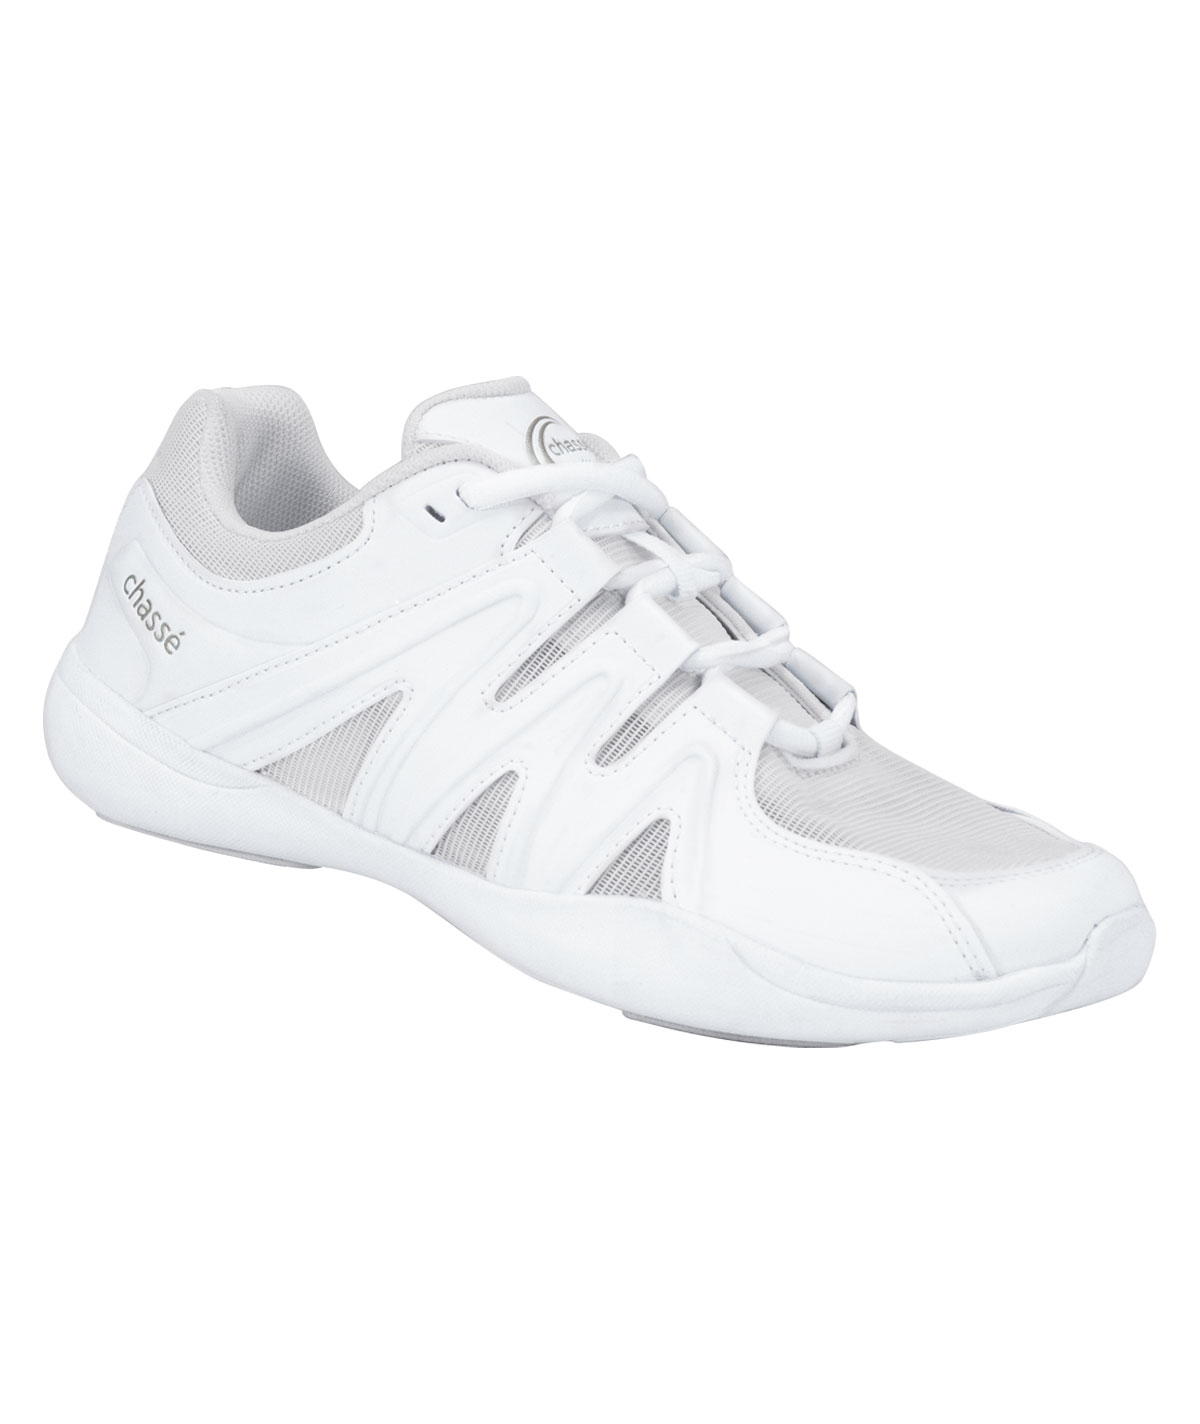 fusion cheer shoes